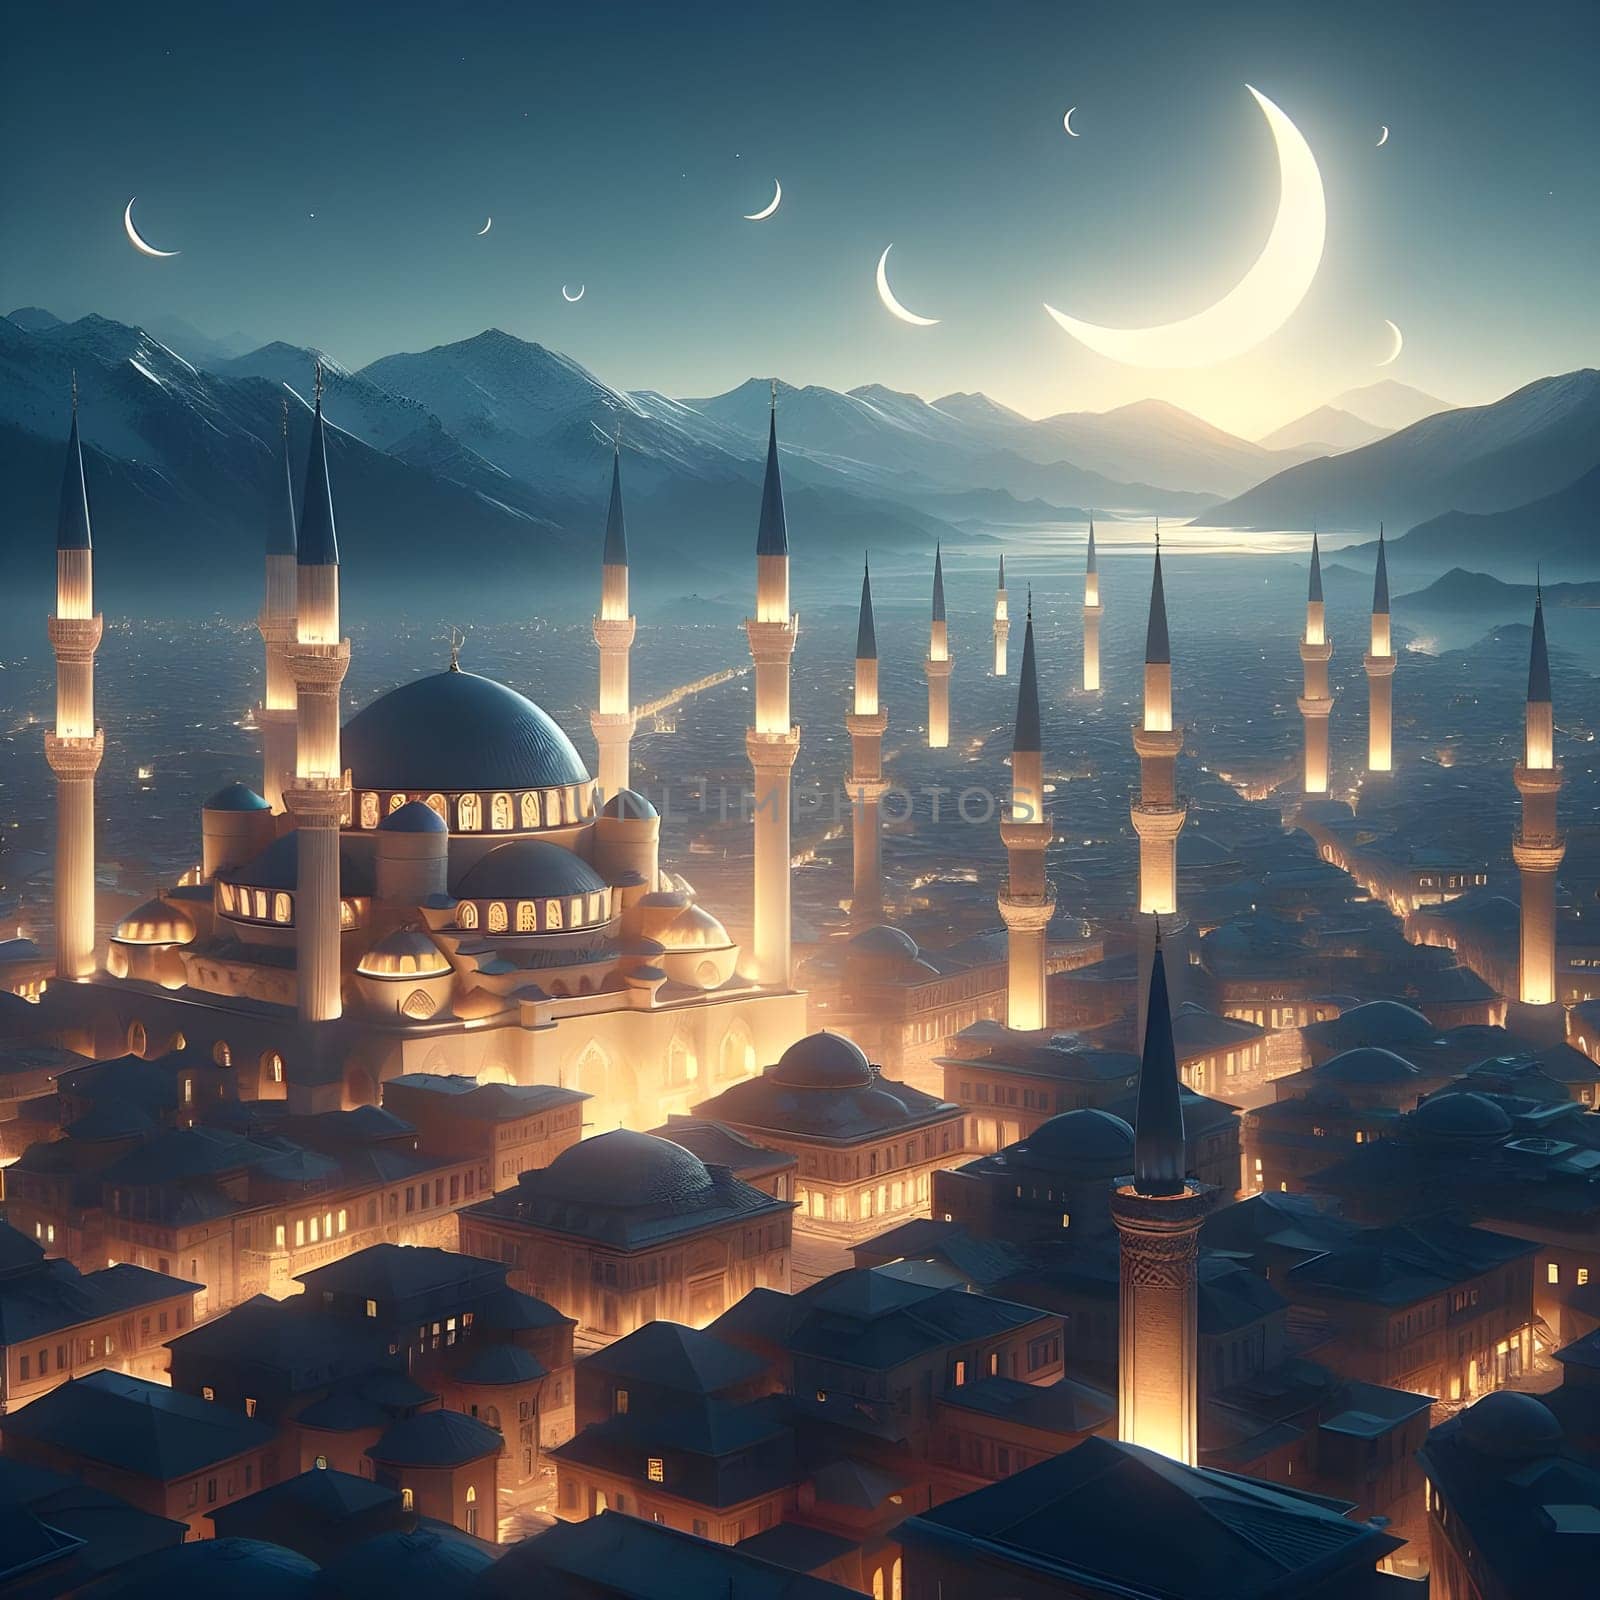 An aerial view of a city with a traditional mosque surrounded by twinkling stars, signifying the start of Ramadan by the gentle glow of only one crescent moon. Happy ramadan, ramadhan, ramazan. High quality photo